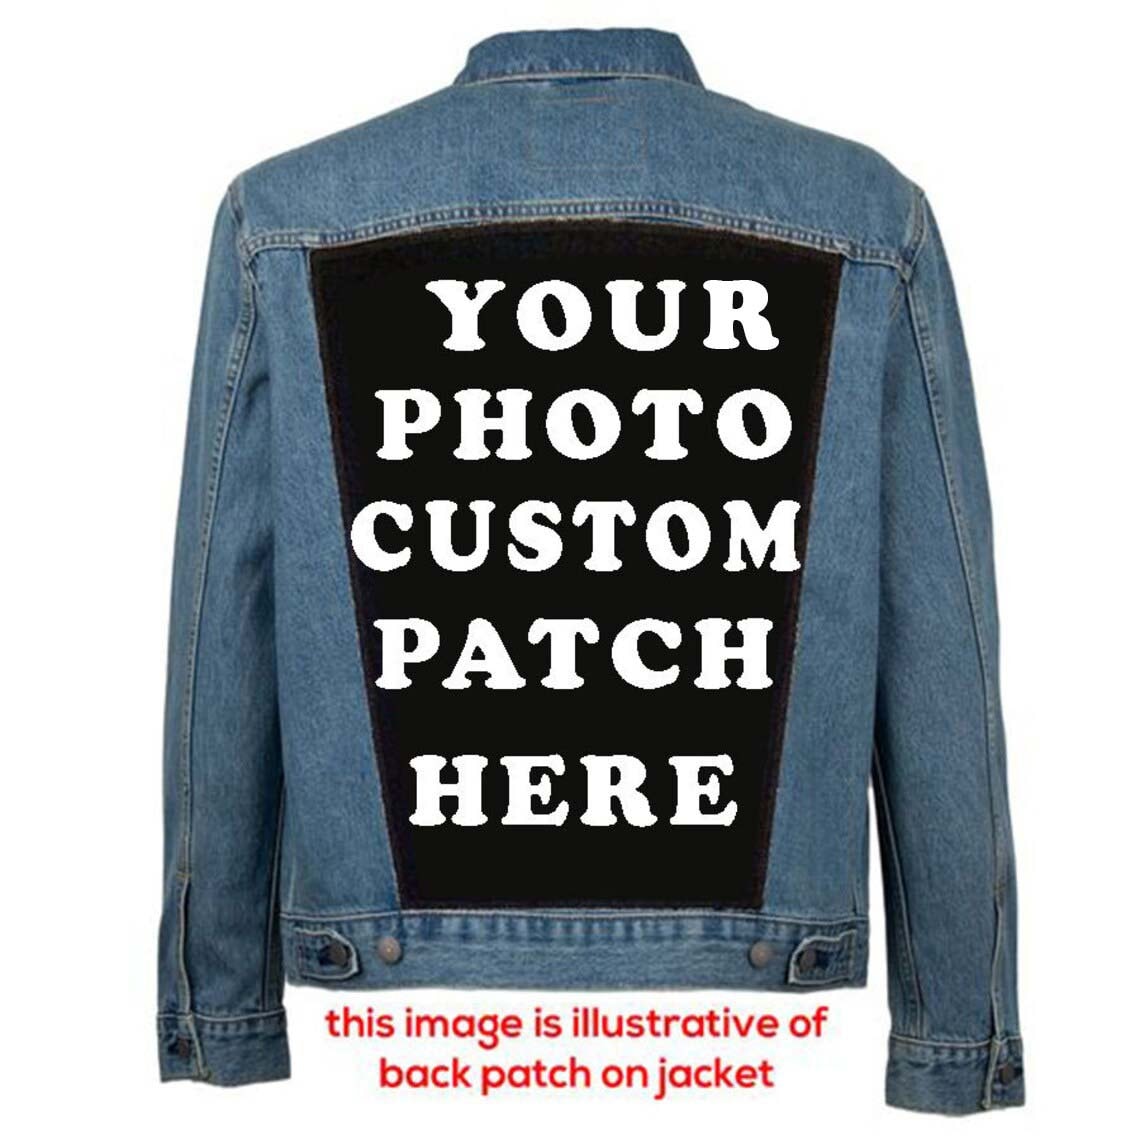 How to Install PVC Custom Made Patch On Jacket Using Glue